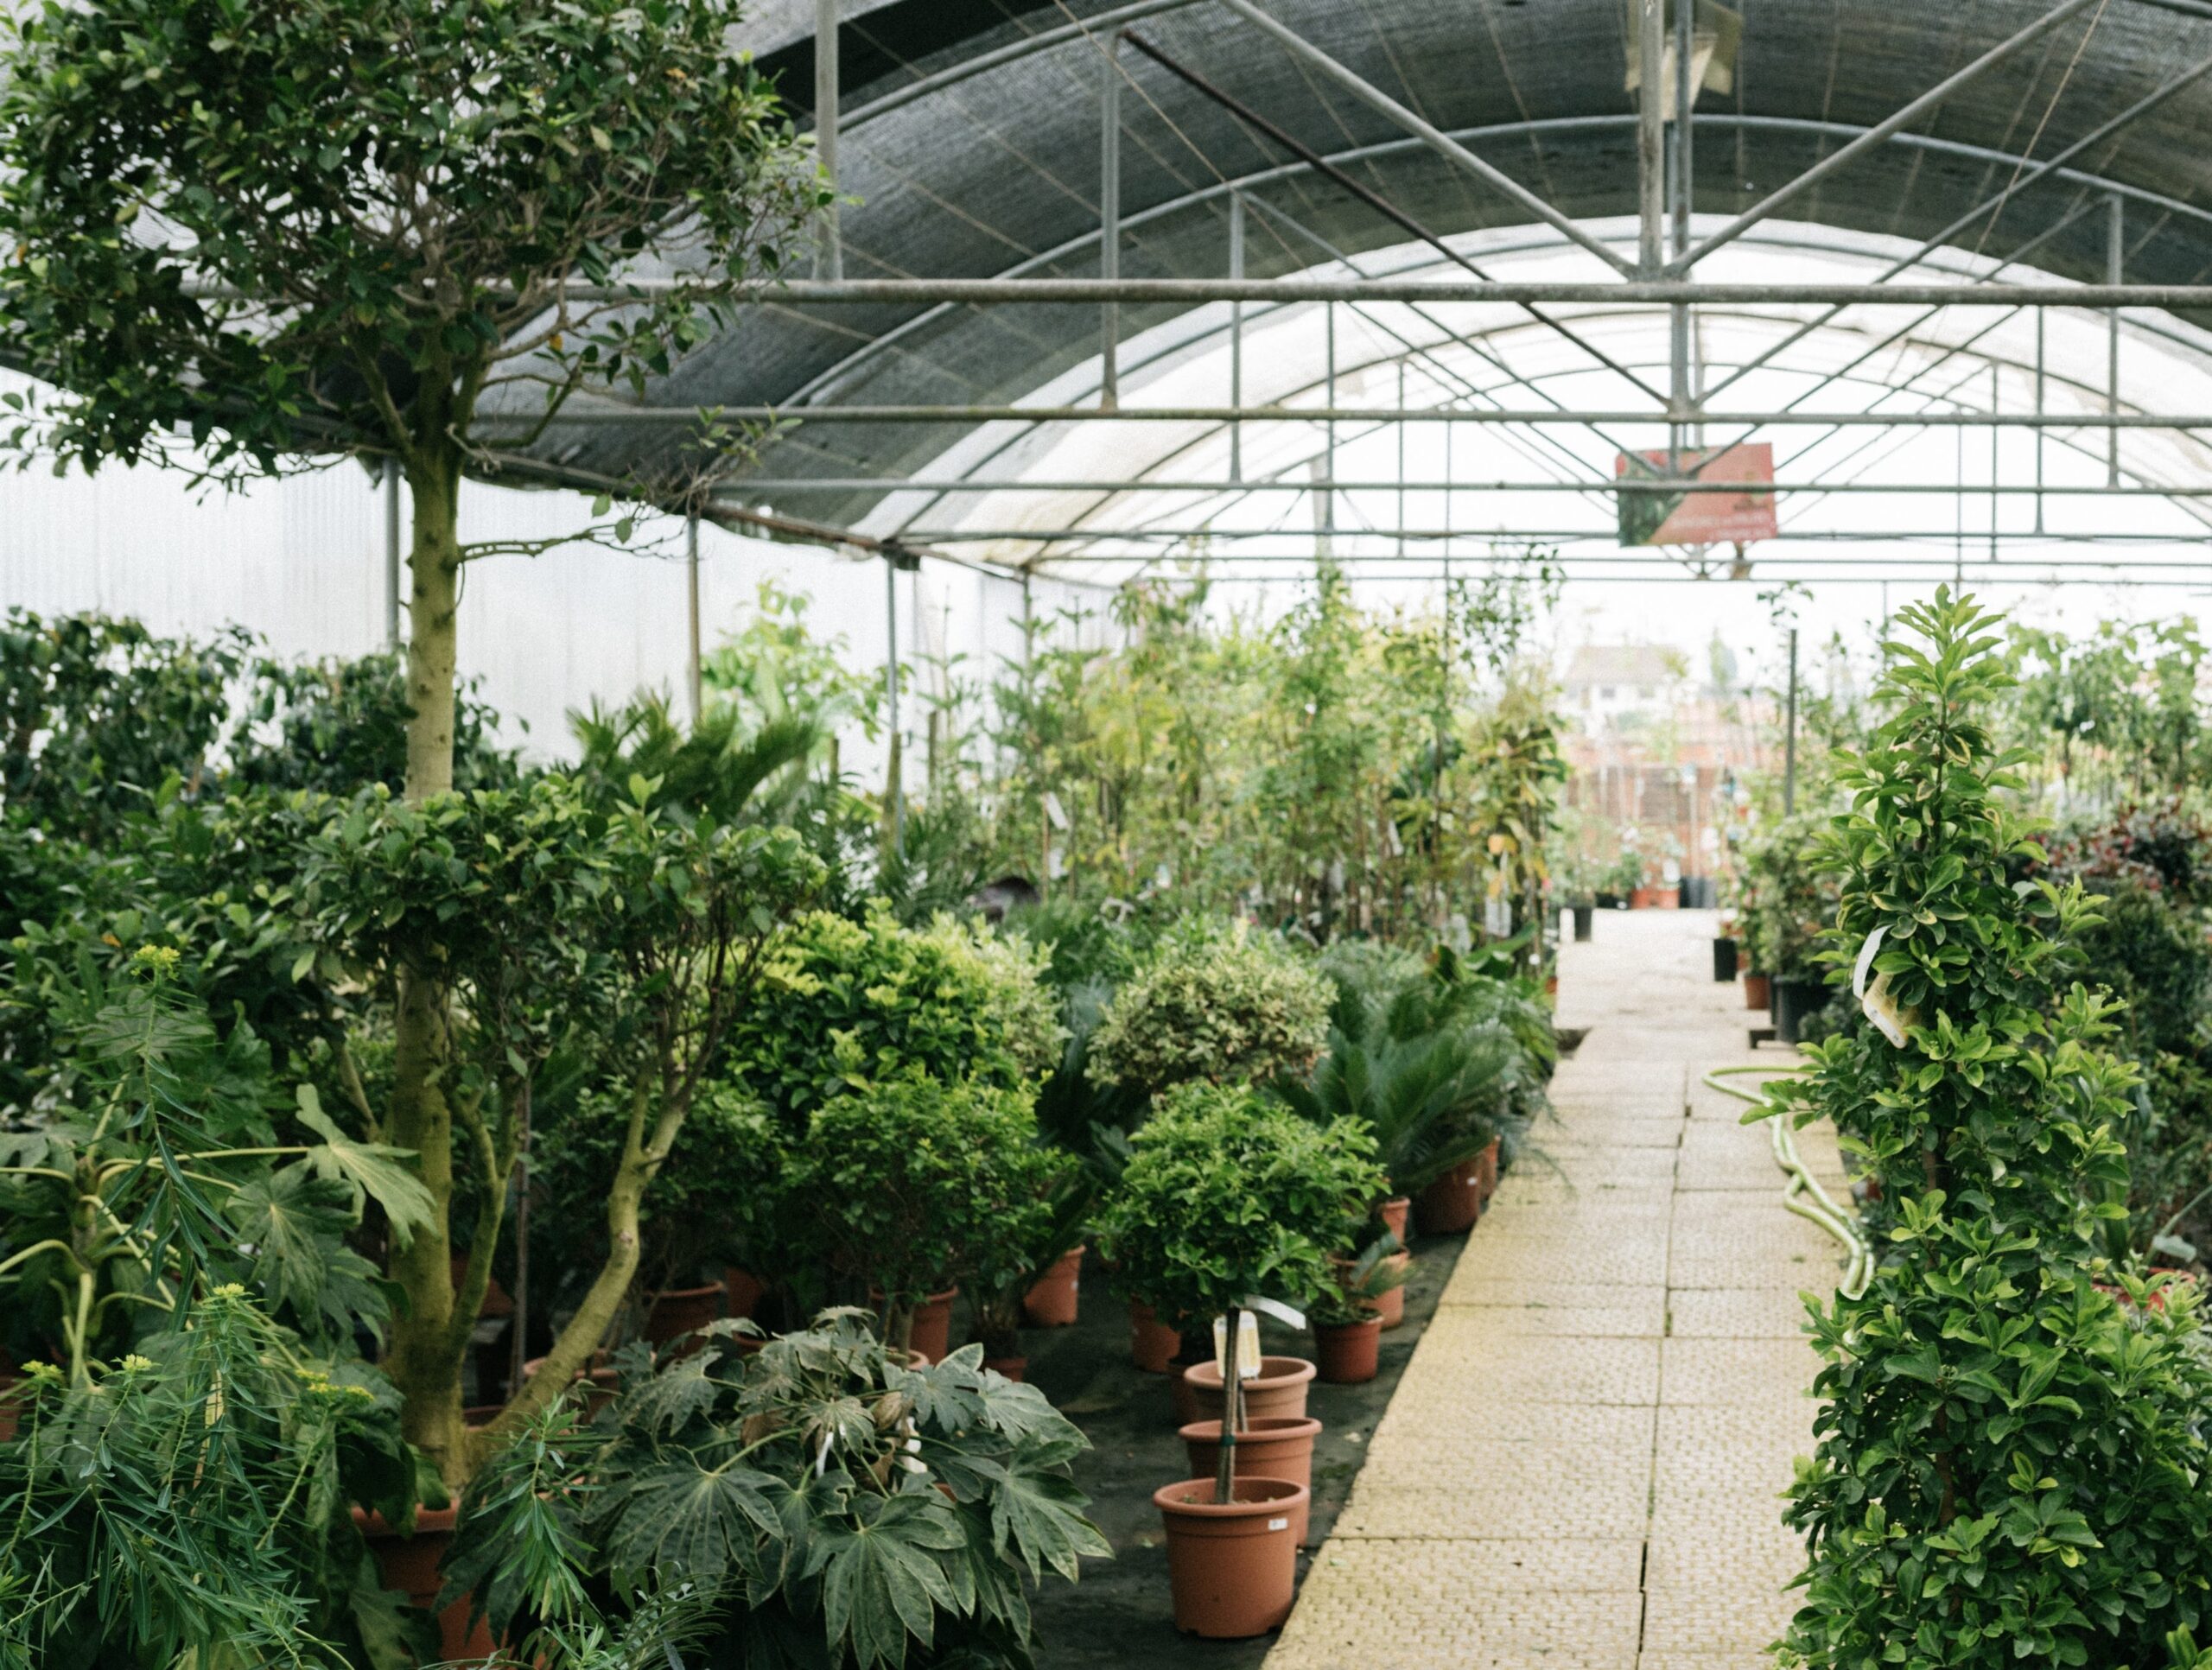 The Greensboro Botanical Gardens (or Greensboro Arboretum) is a 17 acre site that has plenty of plant collections and beautiful displays for its guests to explore. 
pictured: A botanical gardens' greenhouse structure filled with an array of healthy green plants